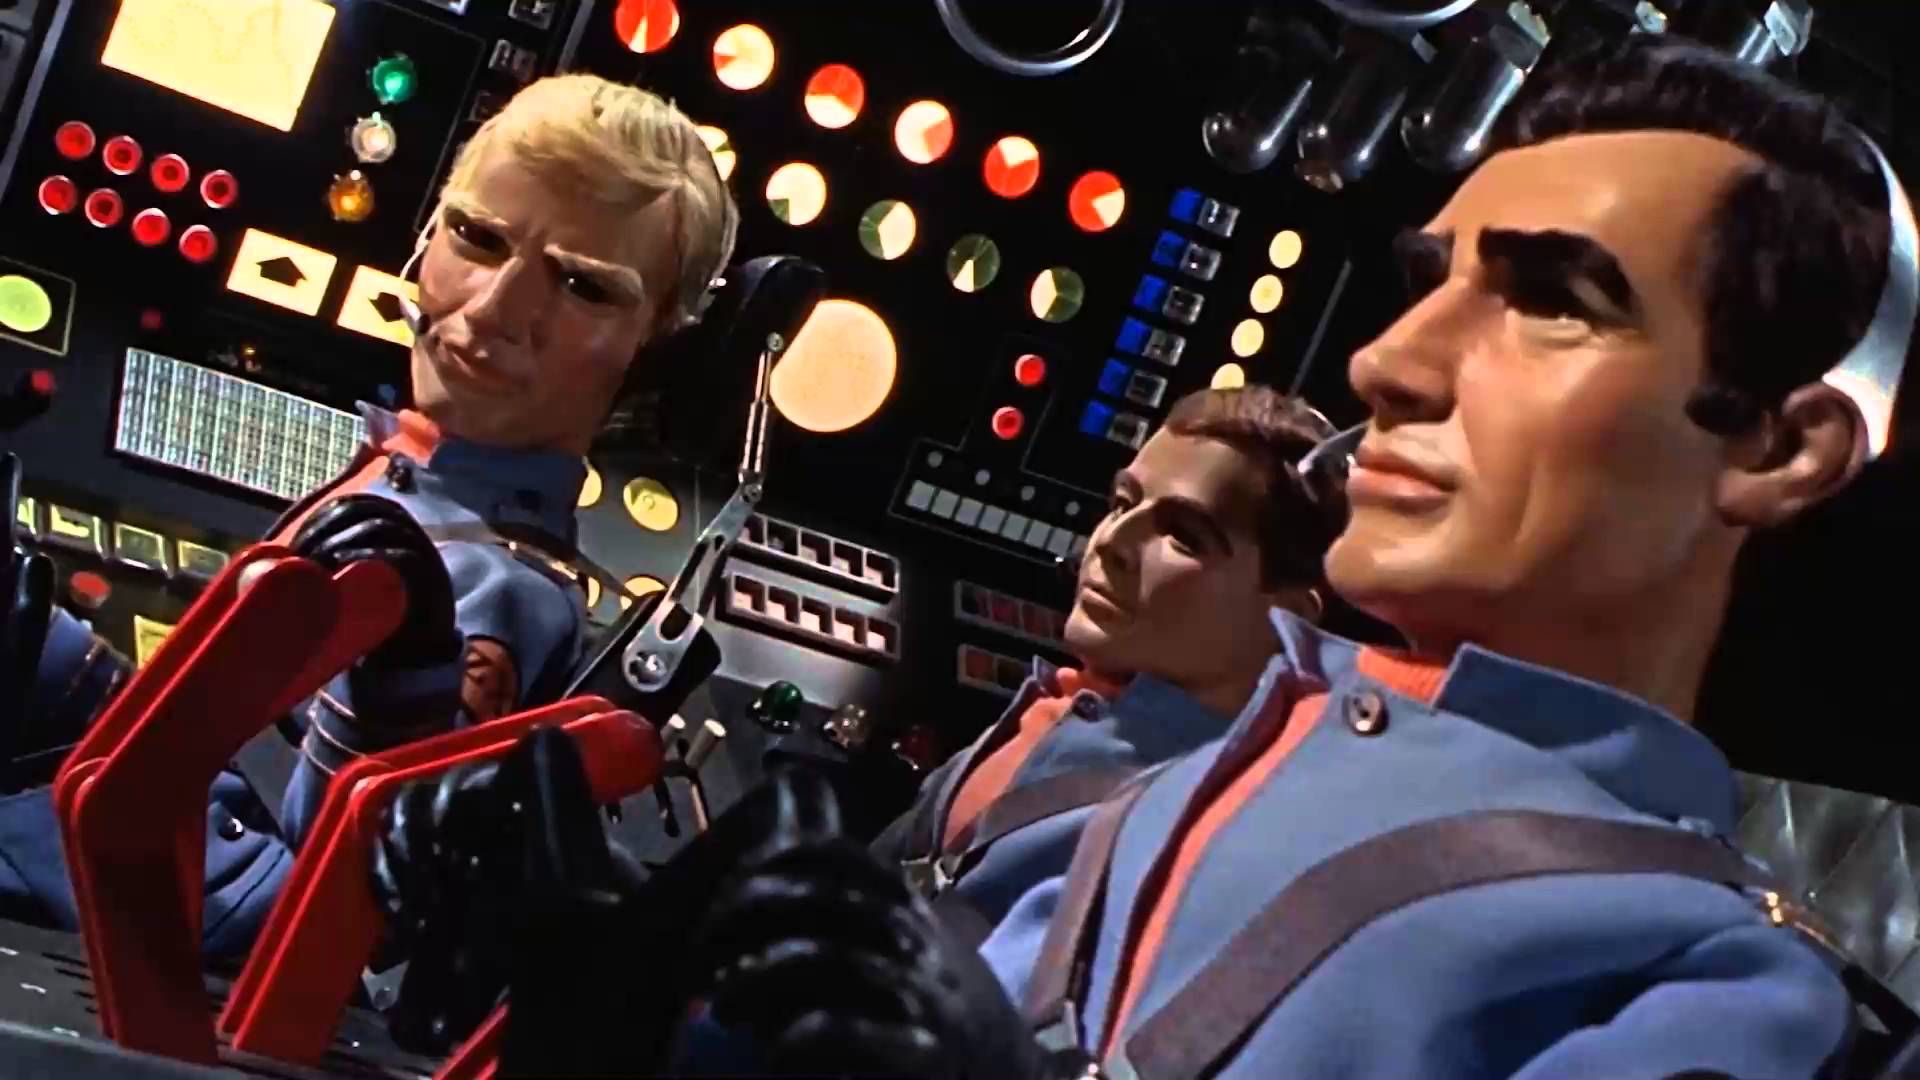 7 Facts About 'Thunderbirds' That Will Have You Standing By For Action